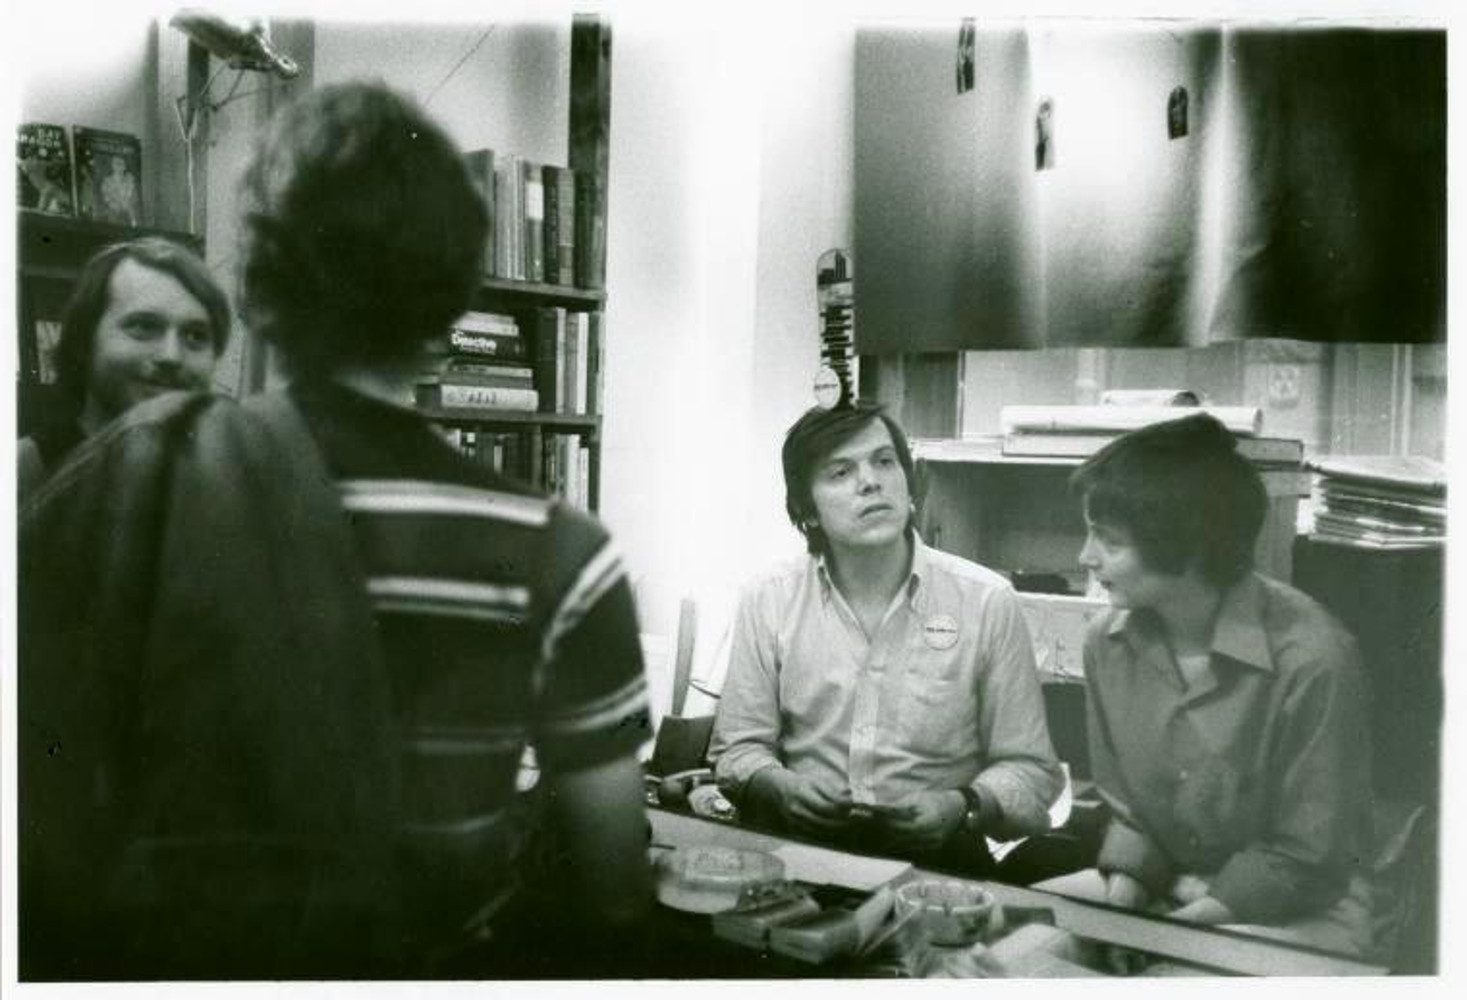 Black and white image of four people. Two seated and two standing. Bookshelves are on the left side of the image.